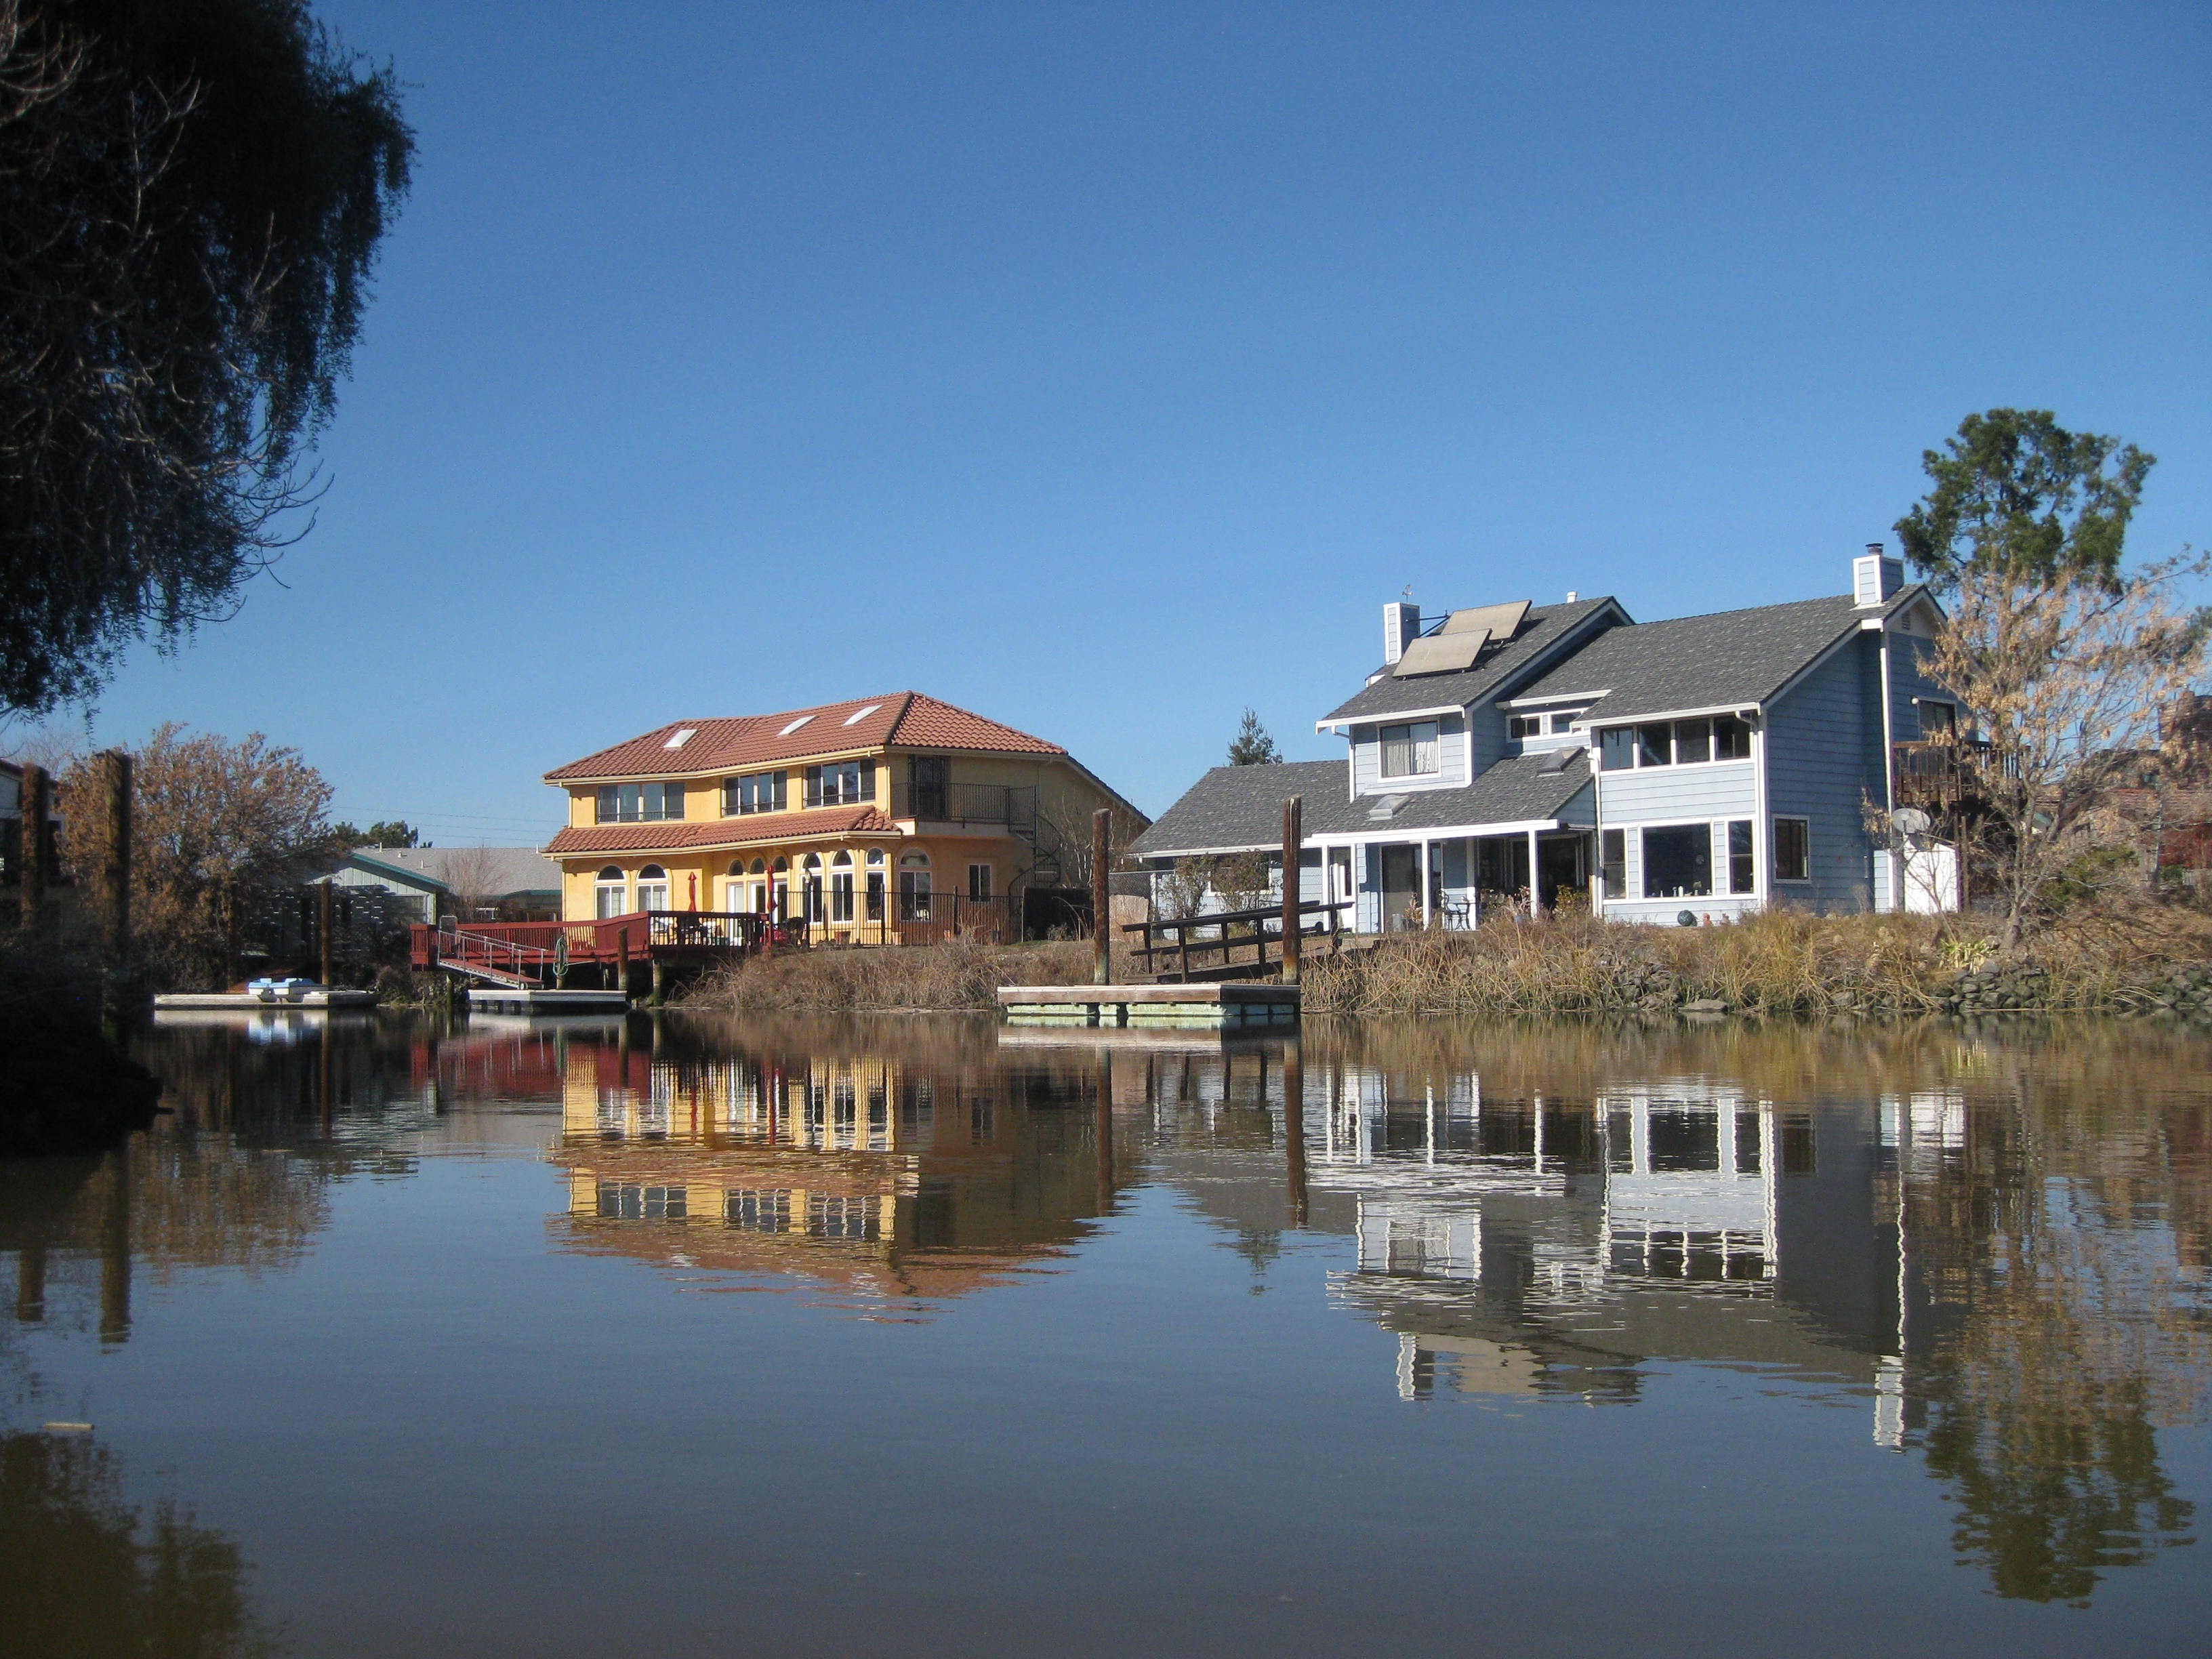 homes-with-docks-on-slough-3